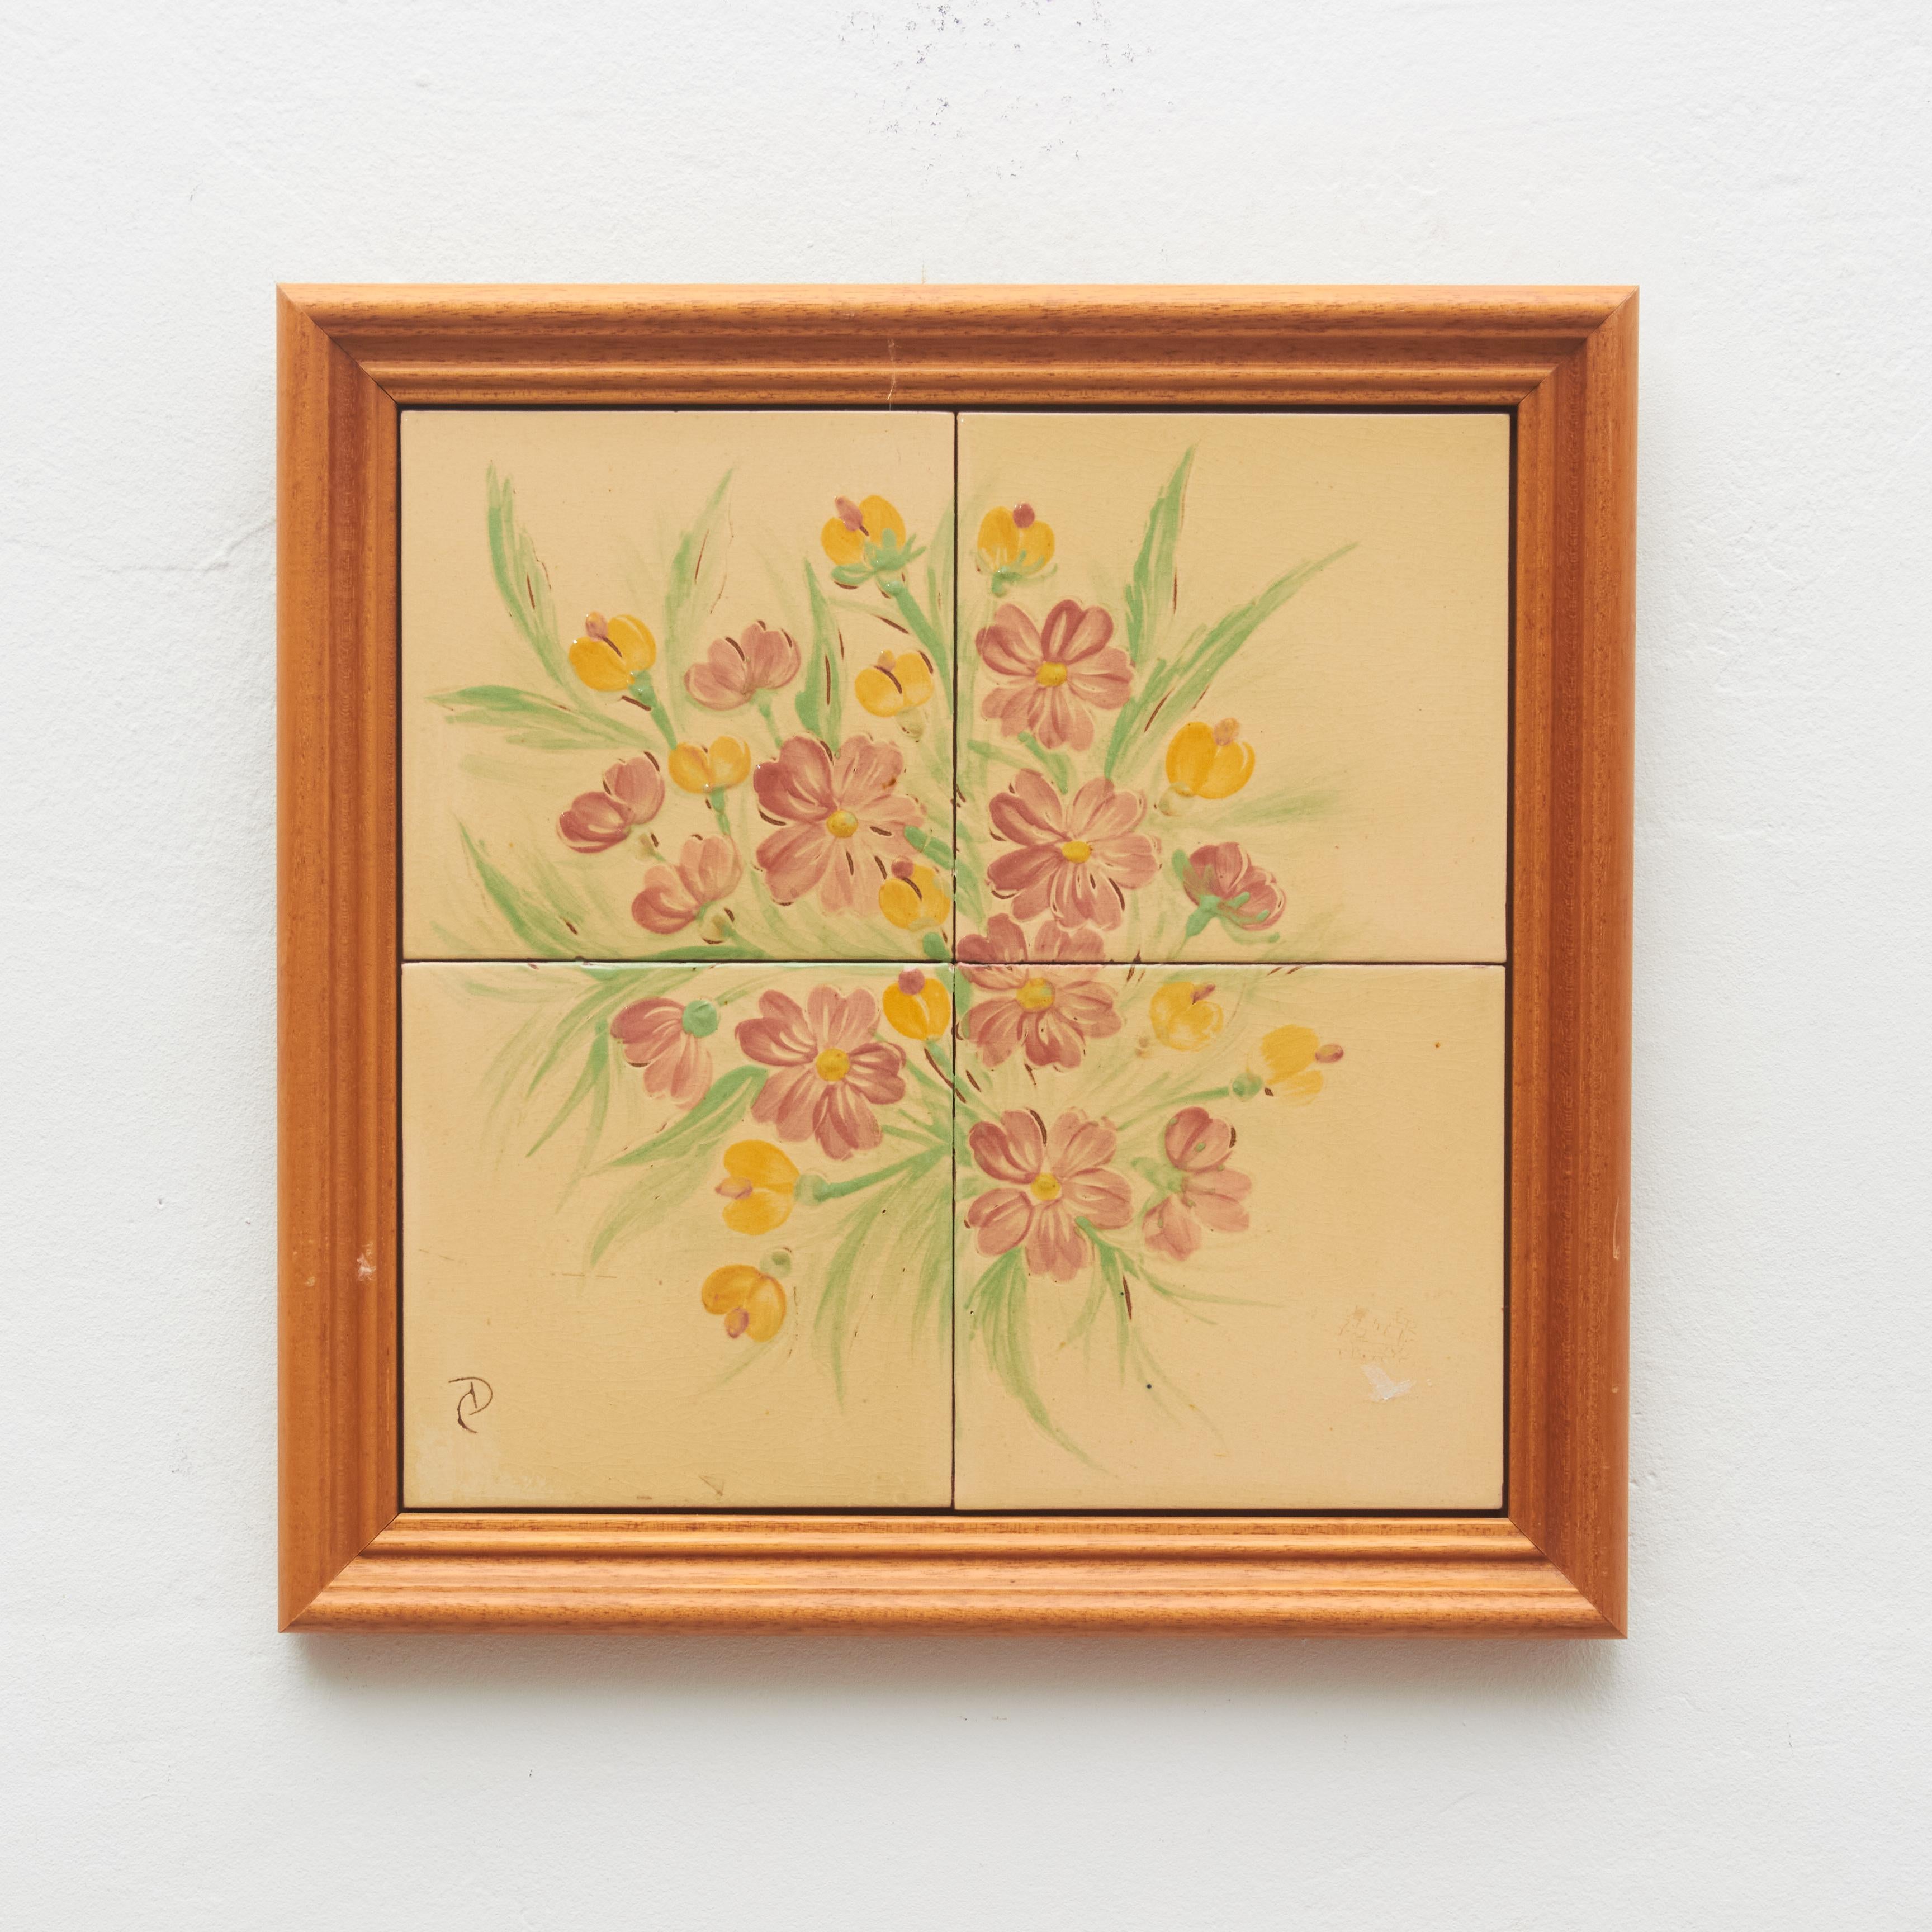 Ceramic hand painted artwork of a plant by Catalan artist Diaz Costa, circa 1960.
Framed. Signed.

In original condition, with minor wear consistent of age and use, preserving a beautiul patina.